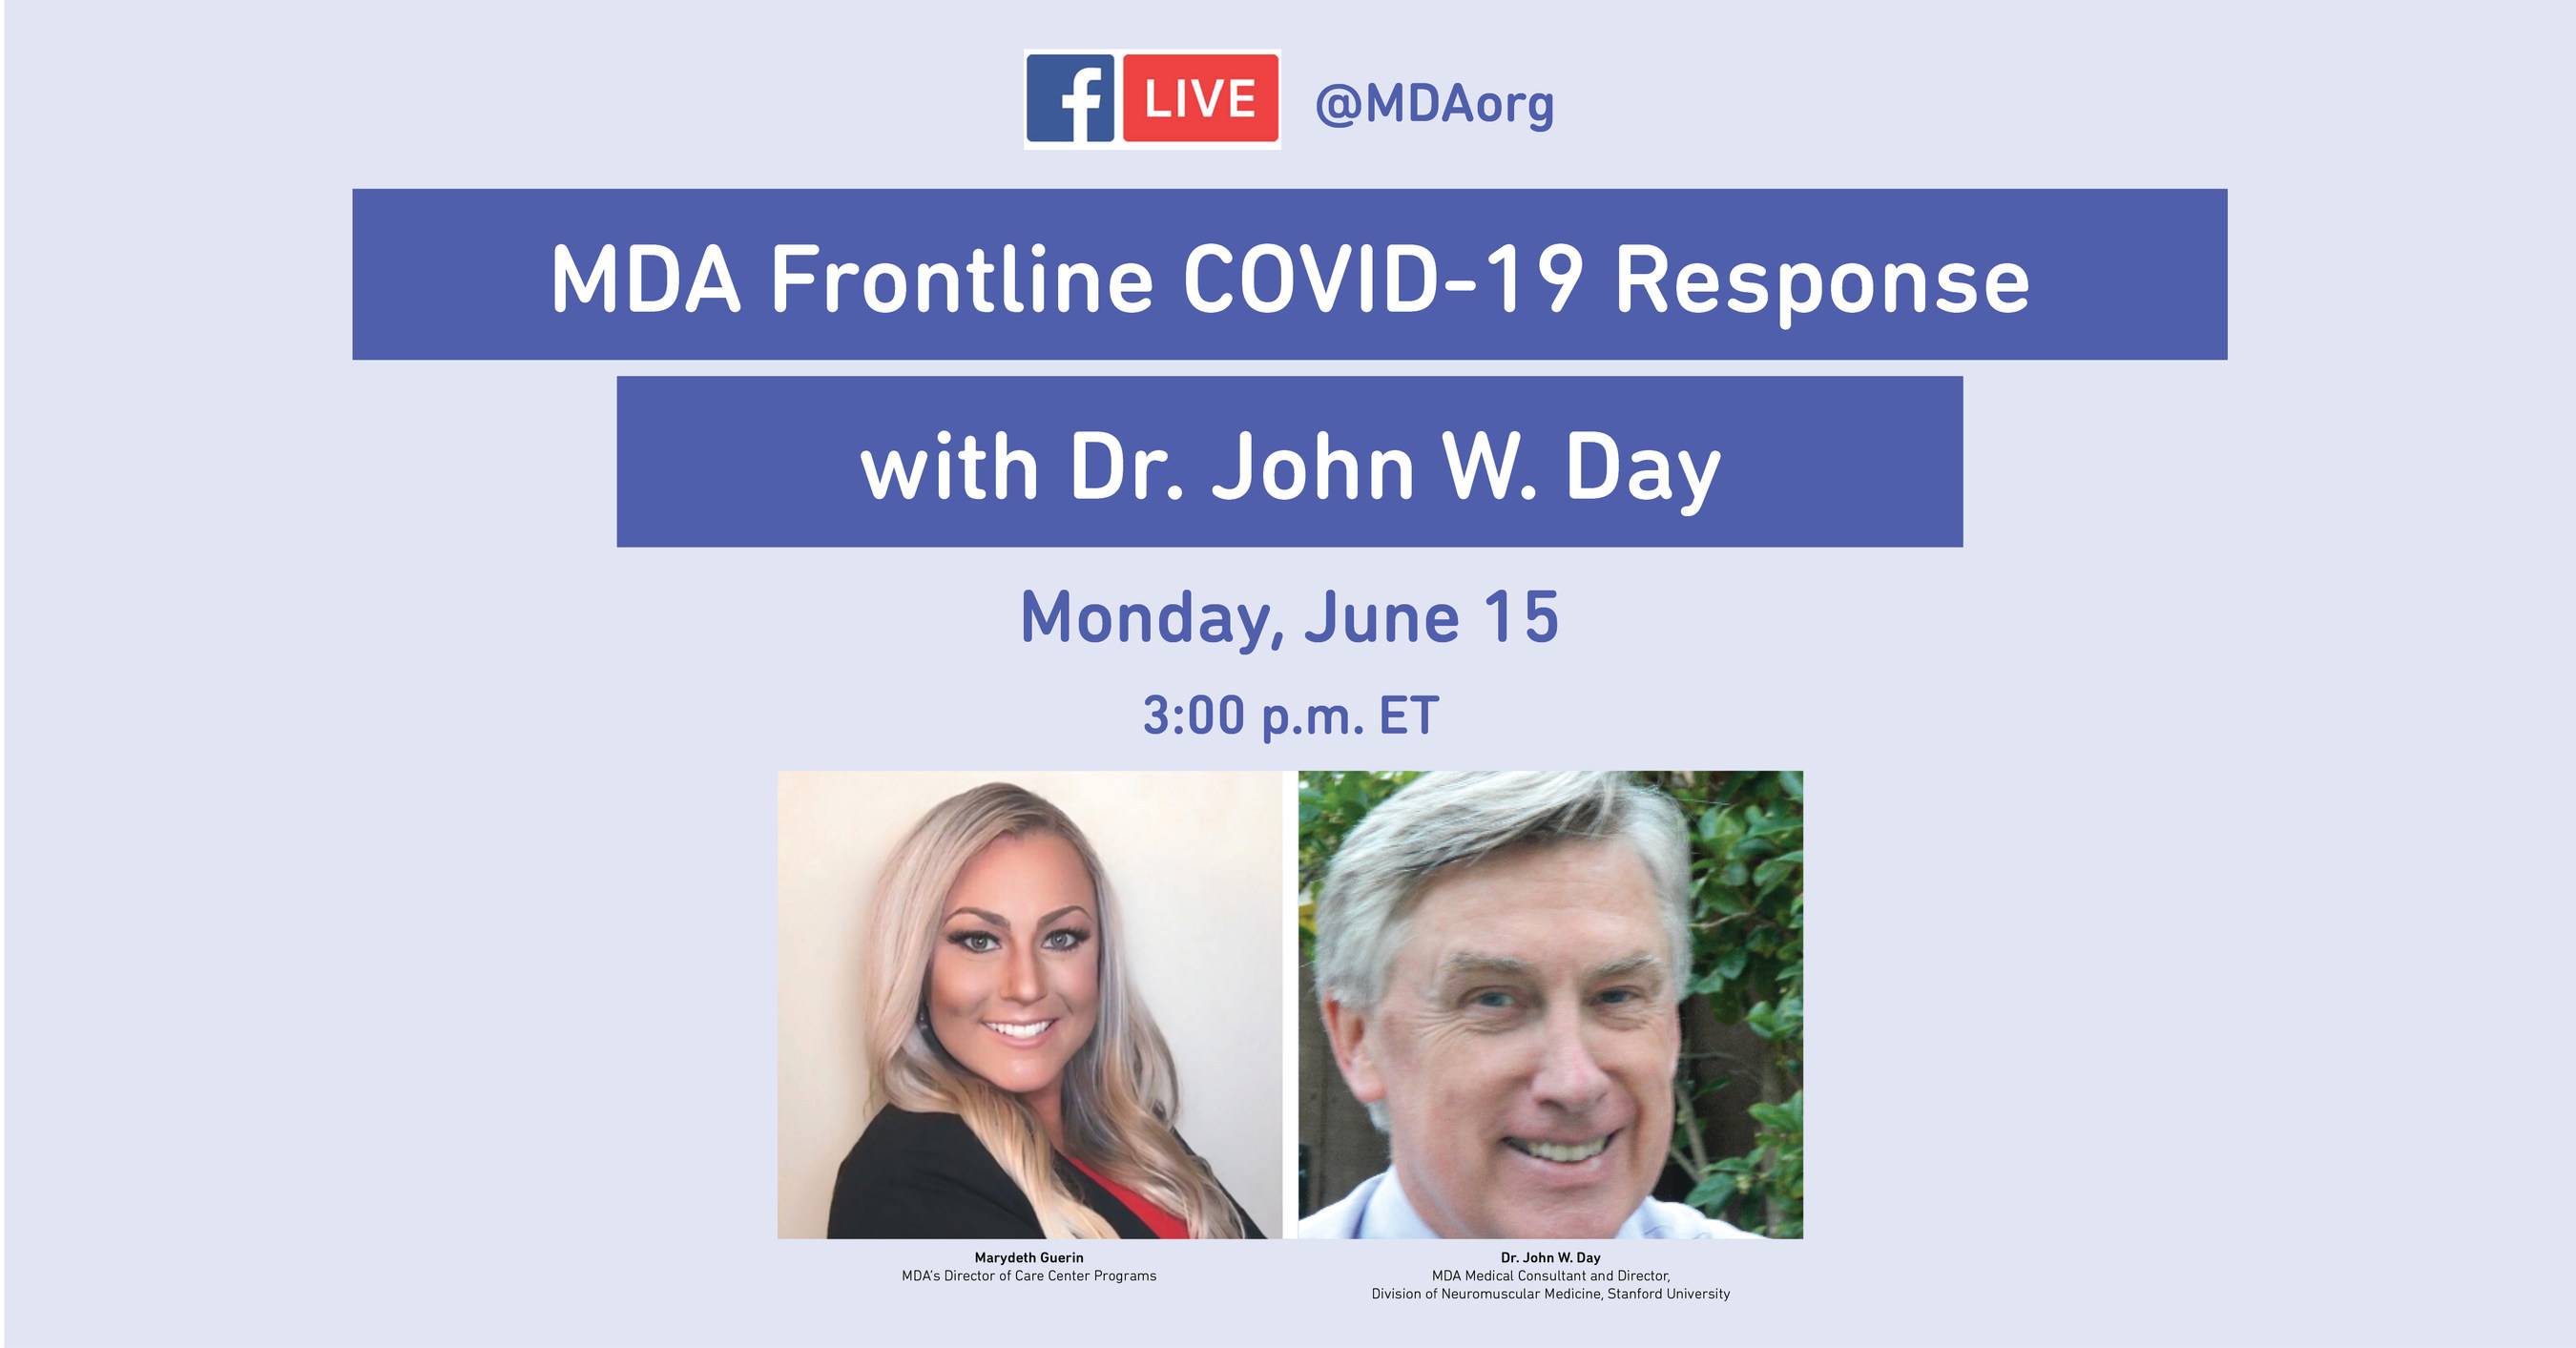 Muscular Dystrophy Association’s Medical Consultant Dr. John W. Day answers questions from the neuromuscular disease community as the country reopens in the midst of the COVID-19 pandemic.